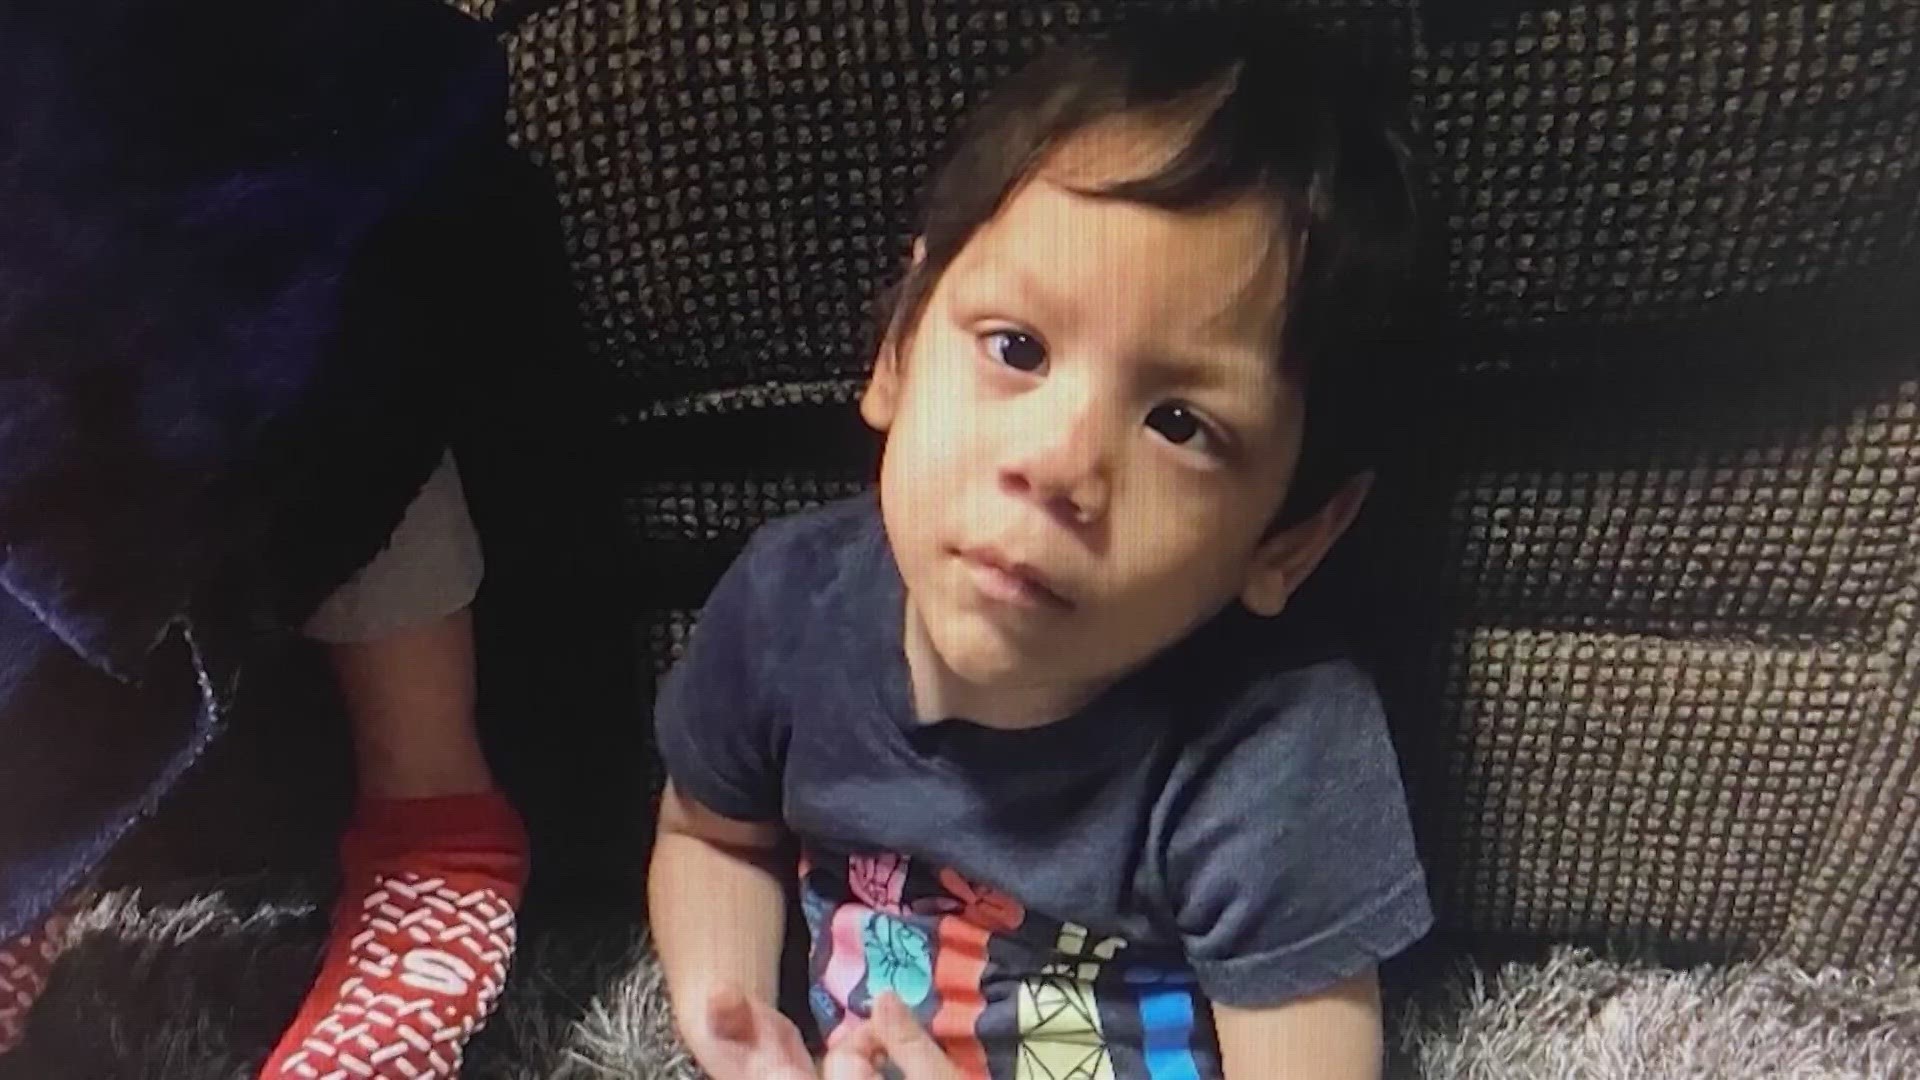 Police in Everman, Texas, told WFAA that there has been no evidence found that the child was sold.